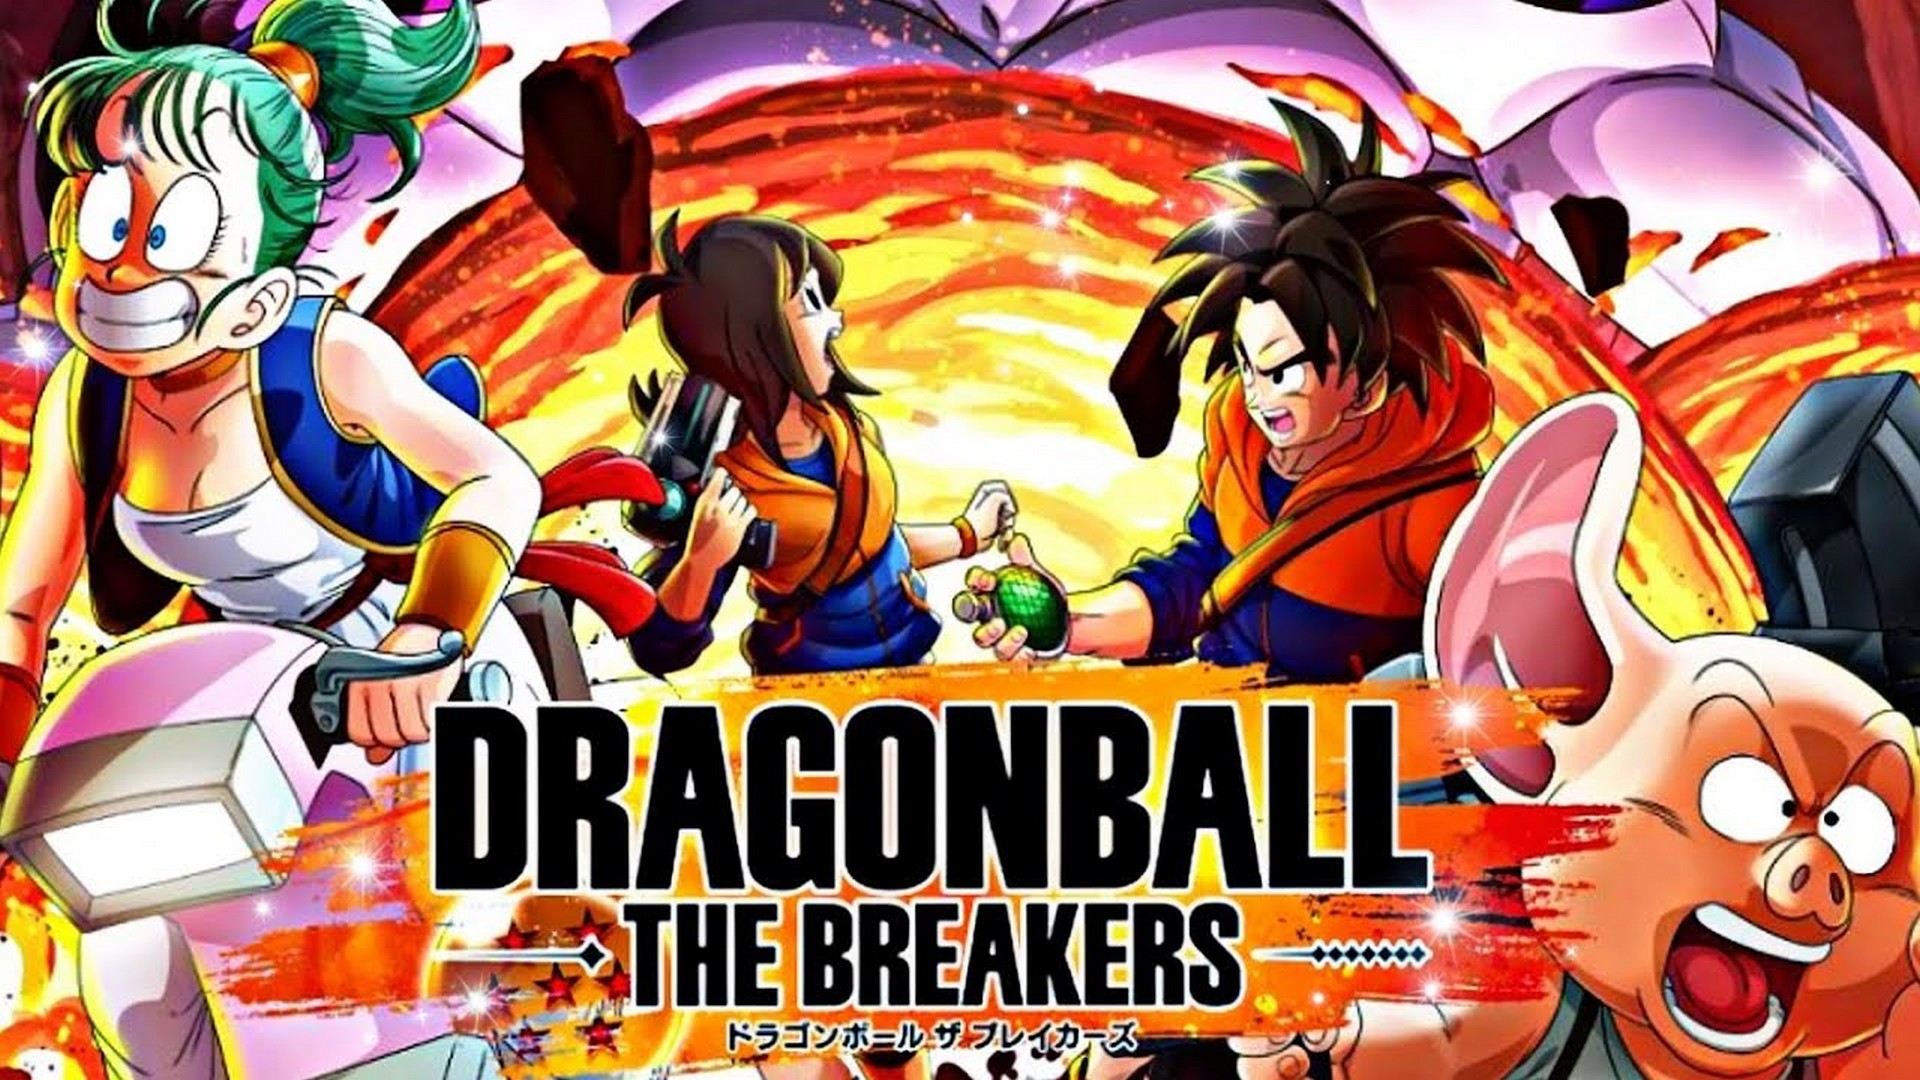 Dragon Ball: The Breakers - Steps on how to connect with friends